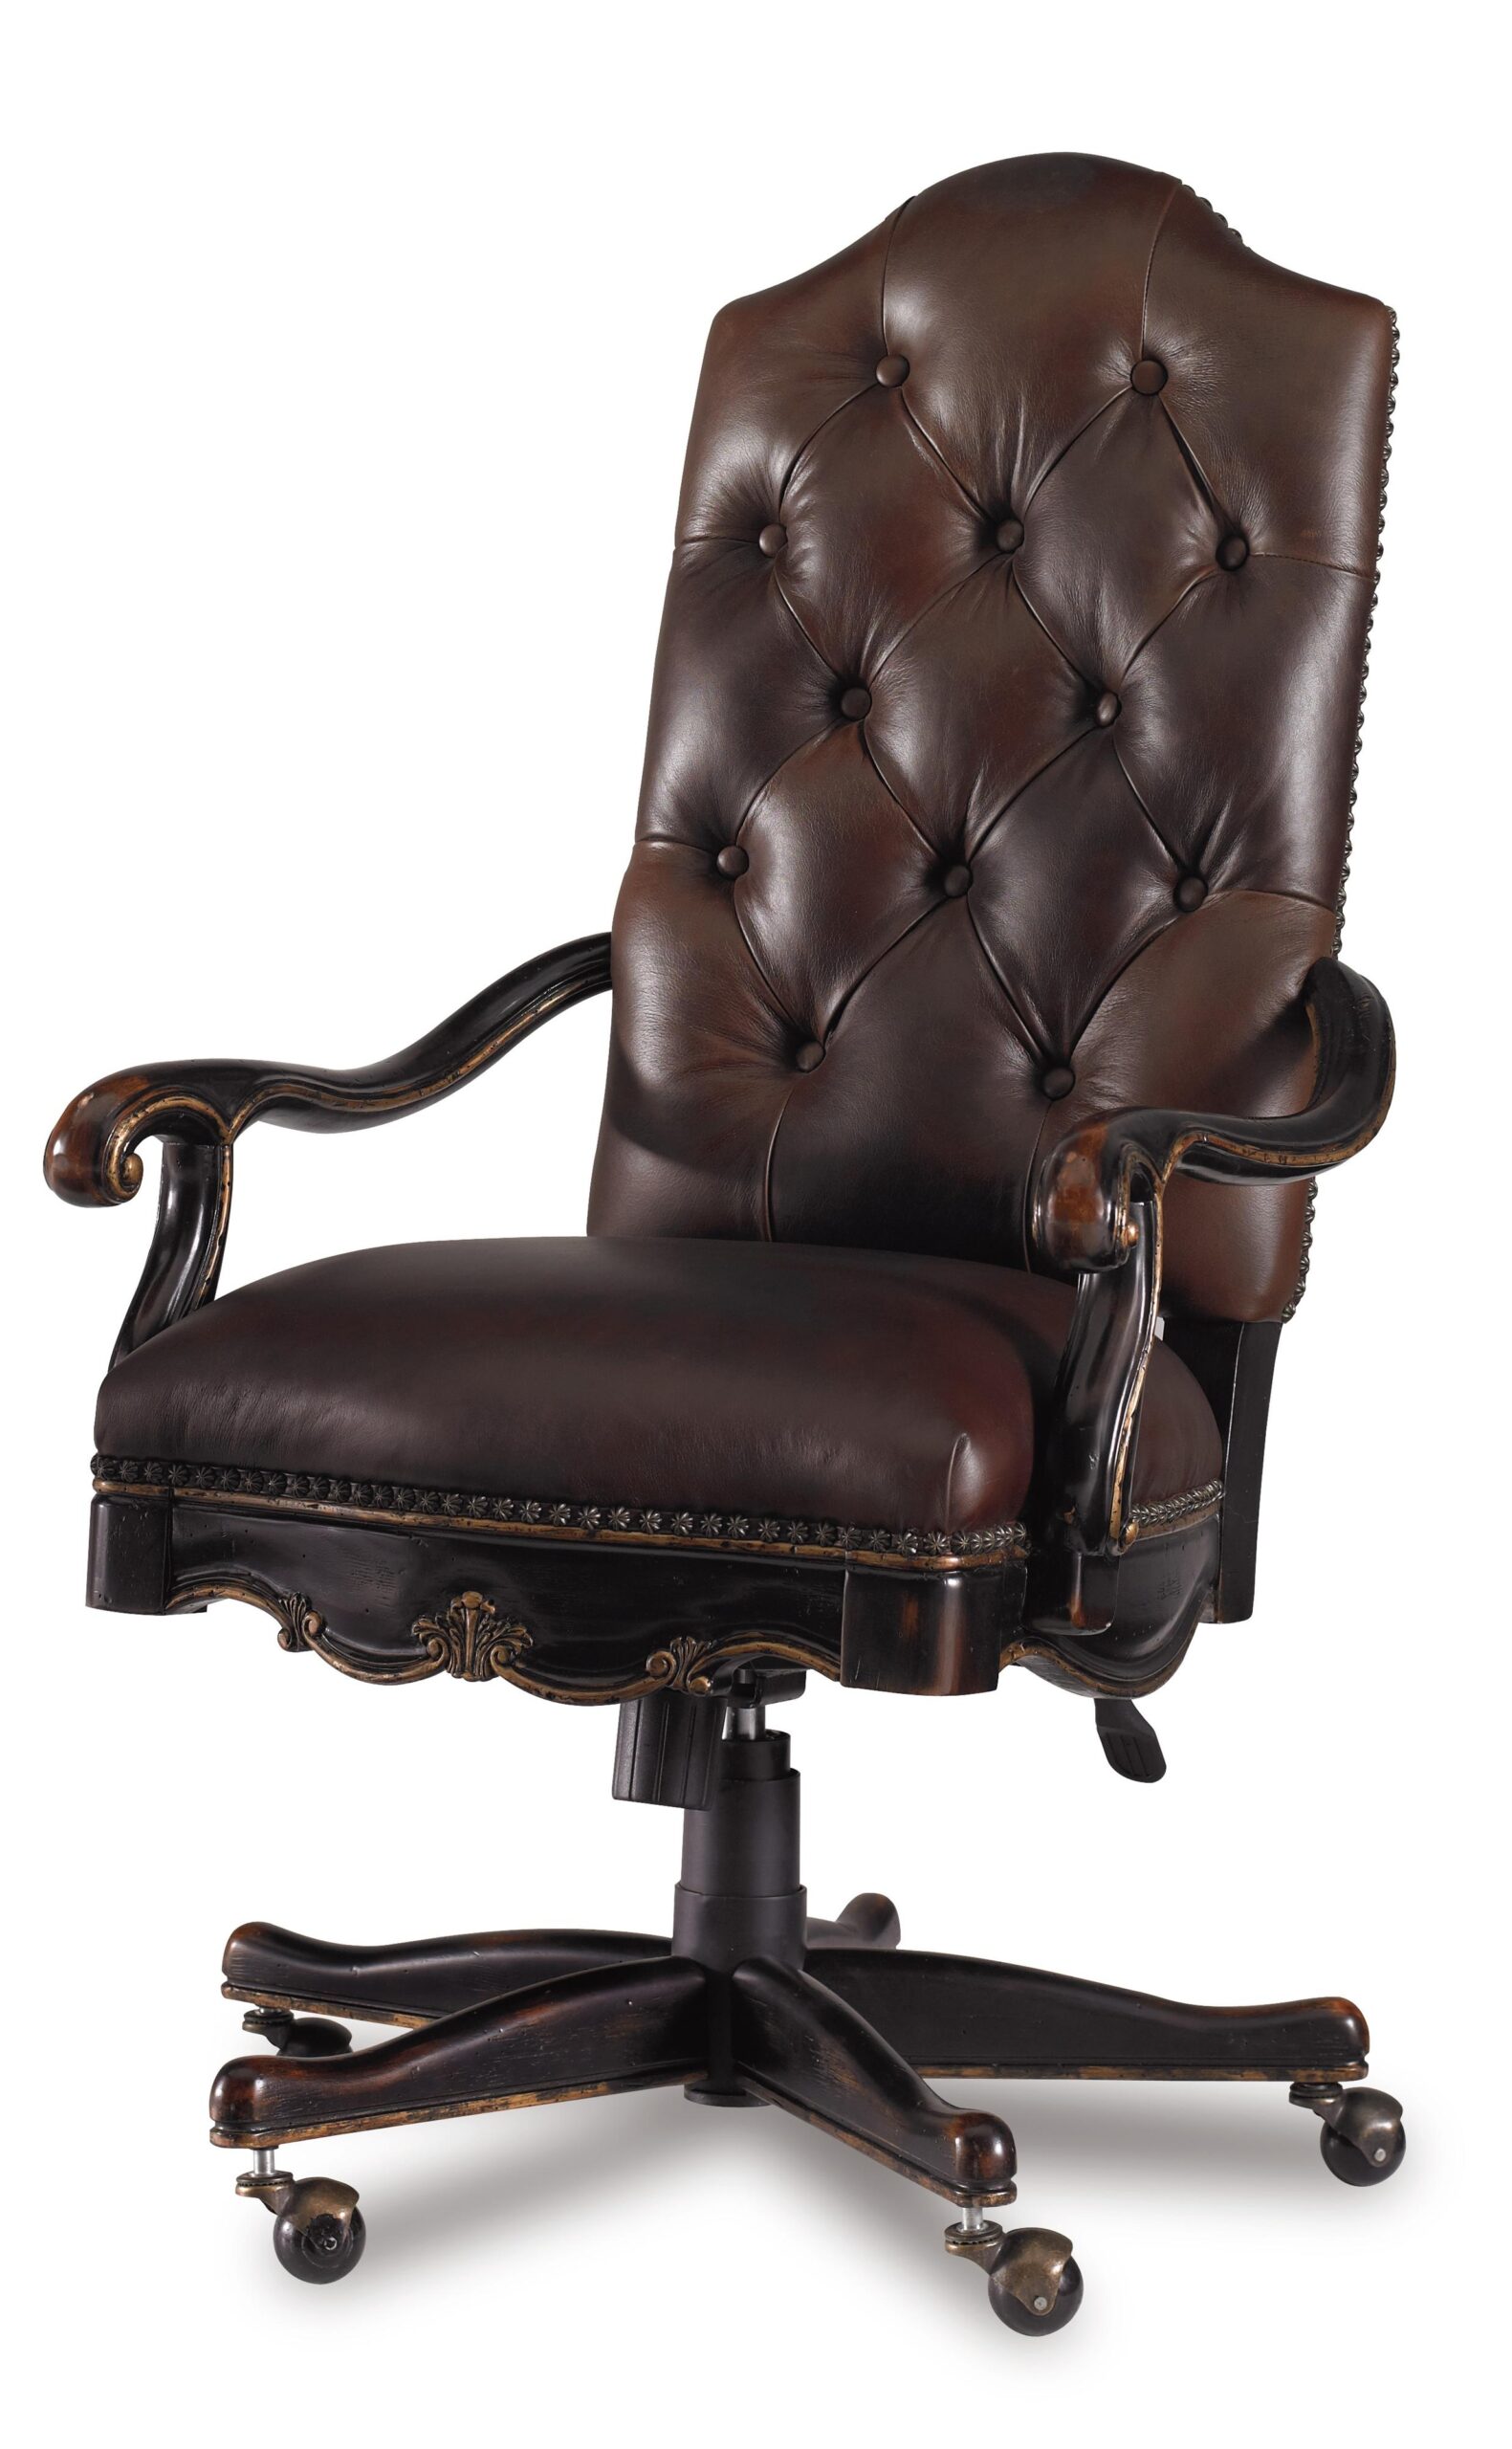 20 The Best Leather Swivel Recliner Executive Office Chairs Scaled 